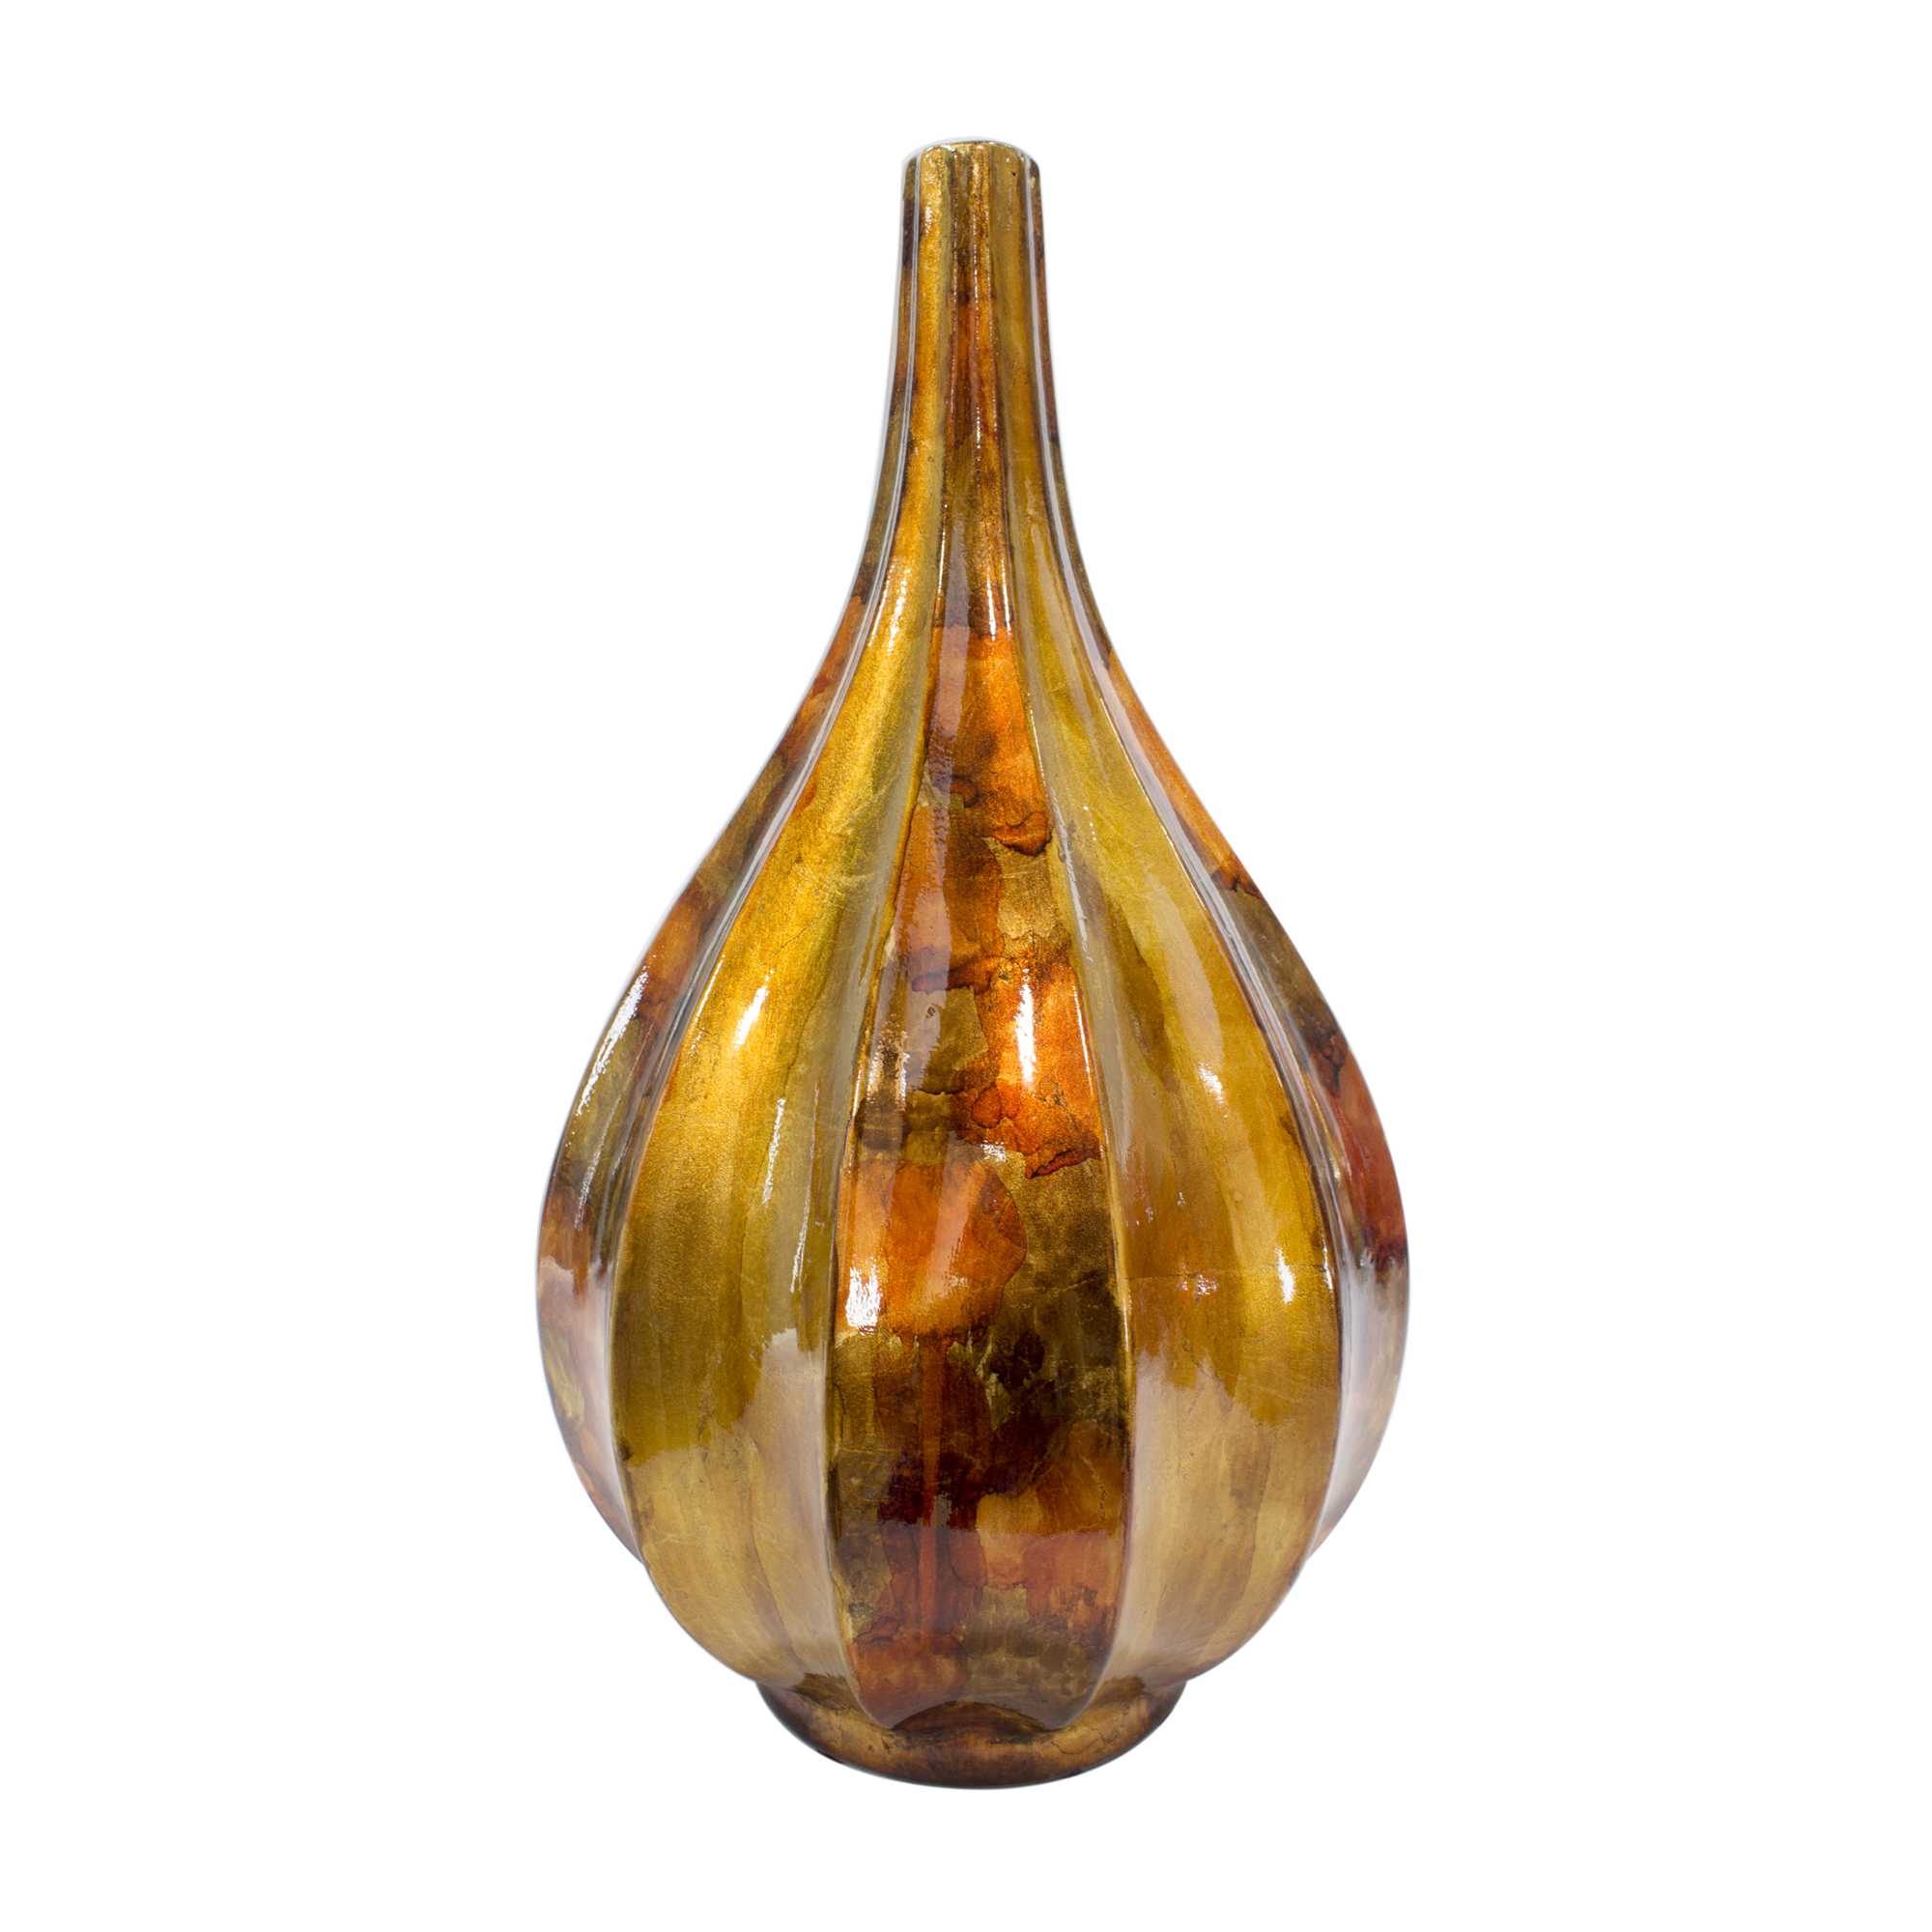 Kya Copper Brown Amber Foil and Lacquer Teardrop Vase